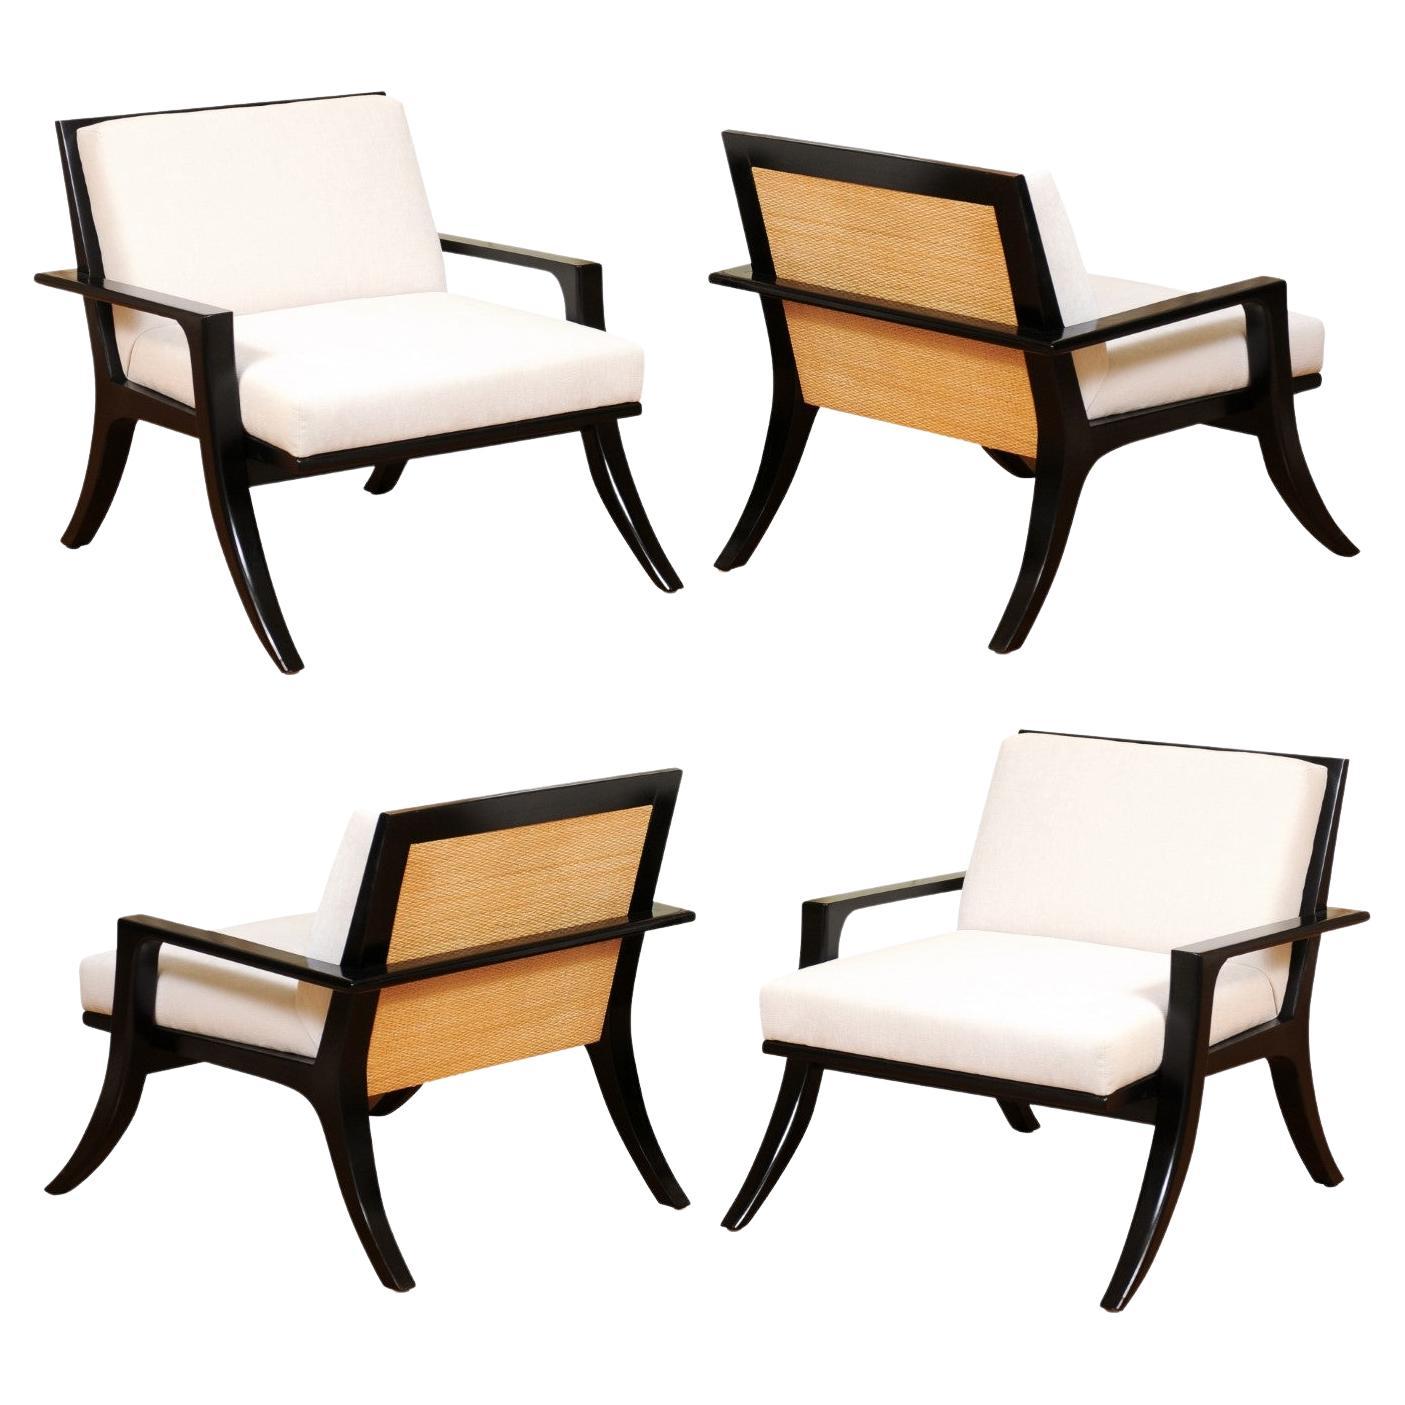 Jaw-Dropping Pair of Cane Klismos Loungers in Black Lacquer, 2 Pair Available